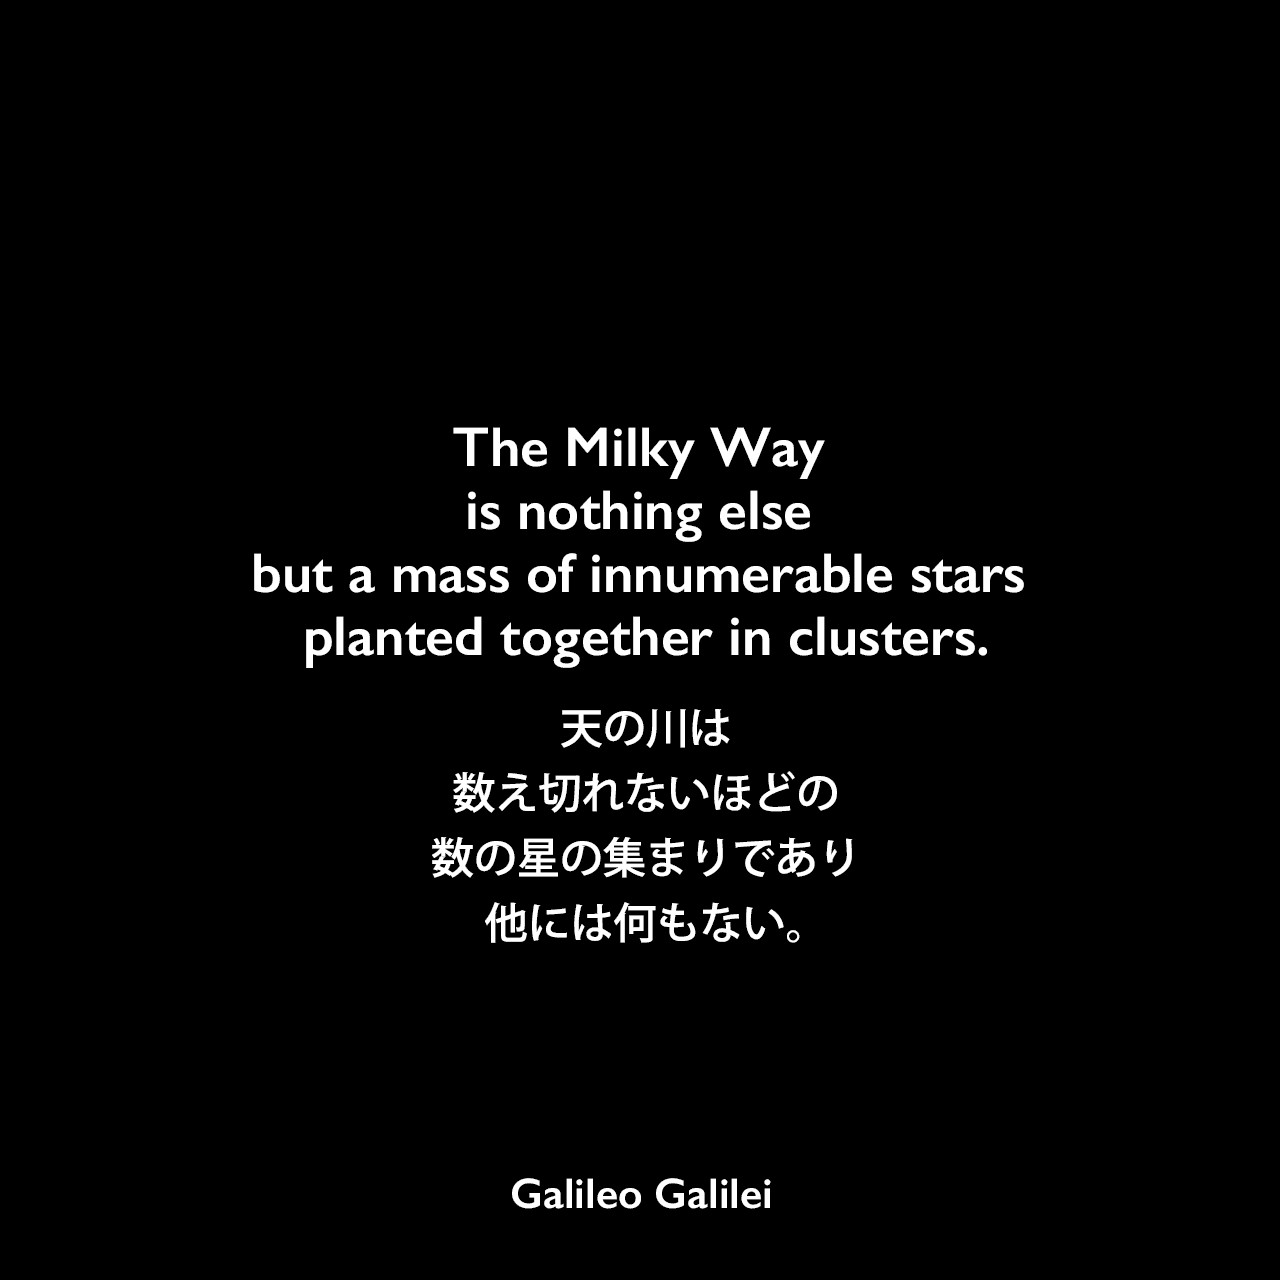 The Milky Way is nothing else but a mass of innumerable stars planted together in clusters.天の川は、数え切れないほどの数の星の集まりであり、他には何もない。Galileo Galilei